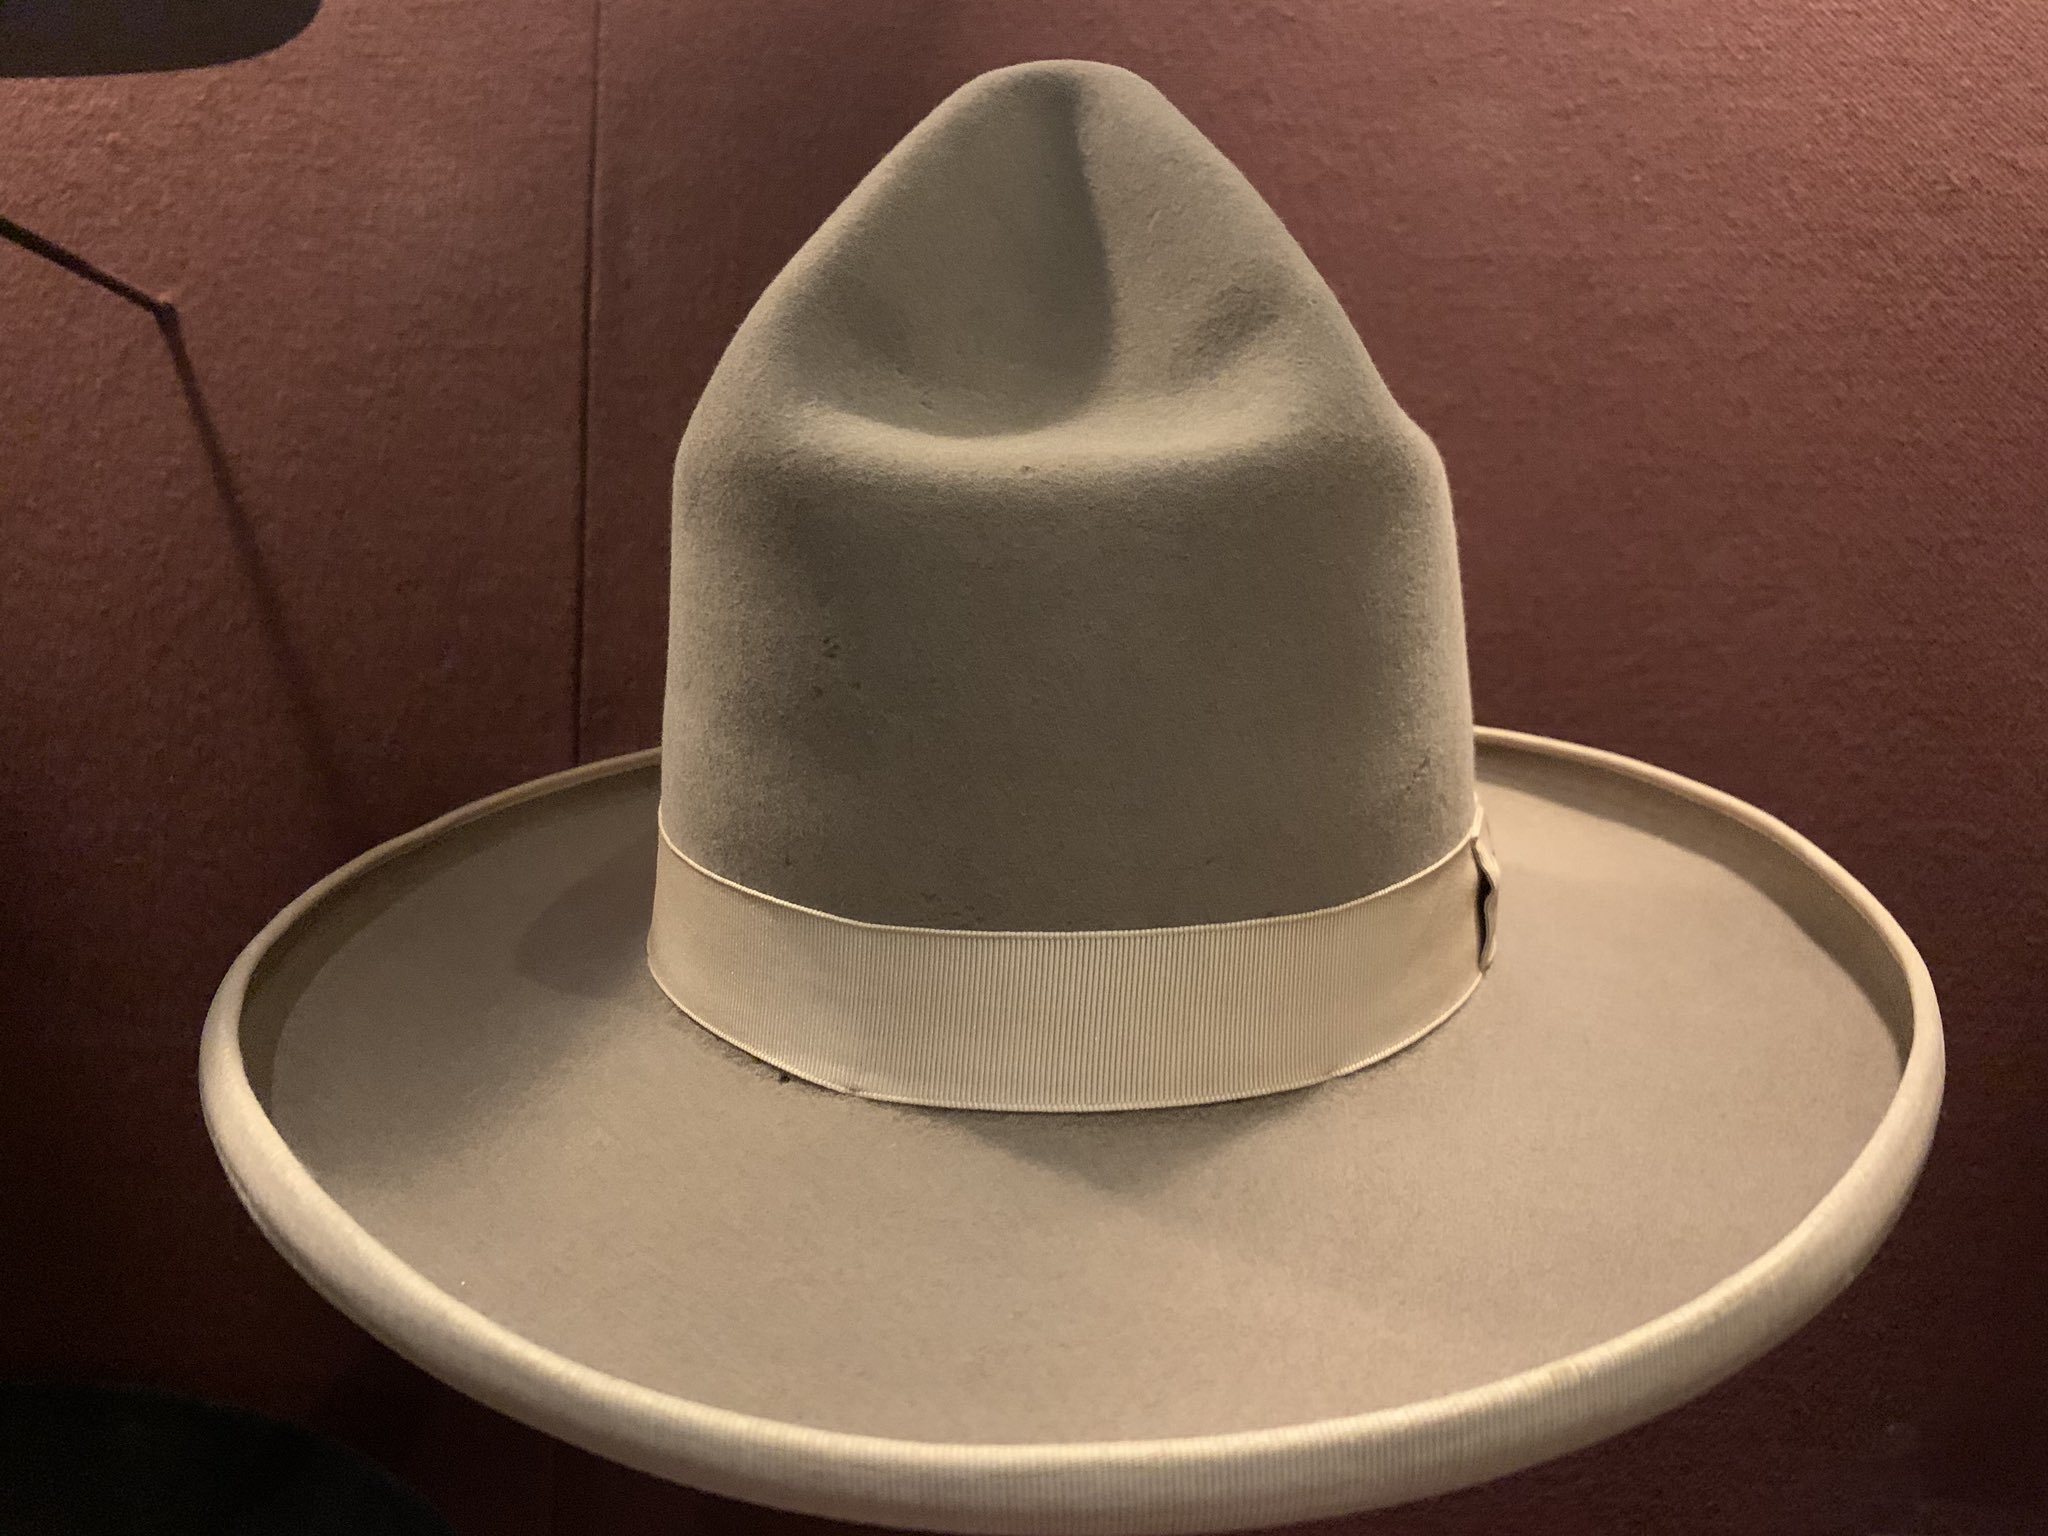 Nat'l Cowboy Museum on Twitter: "Notice the hat the cowboy was wearing in  my earlier post of Borglum's “Cowboy at Rest“? It's called a Montana Peak  like this one from 1928 by